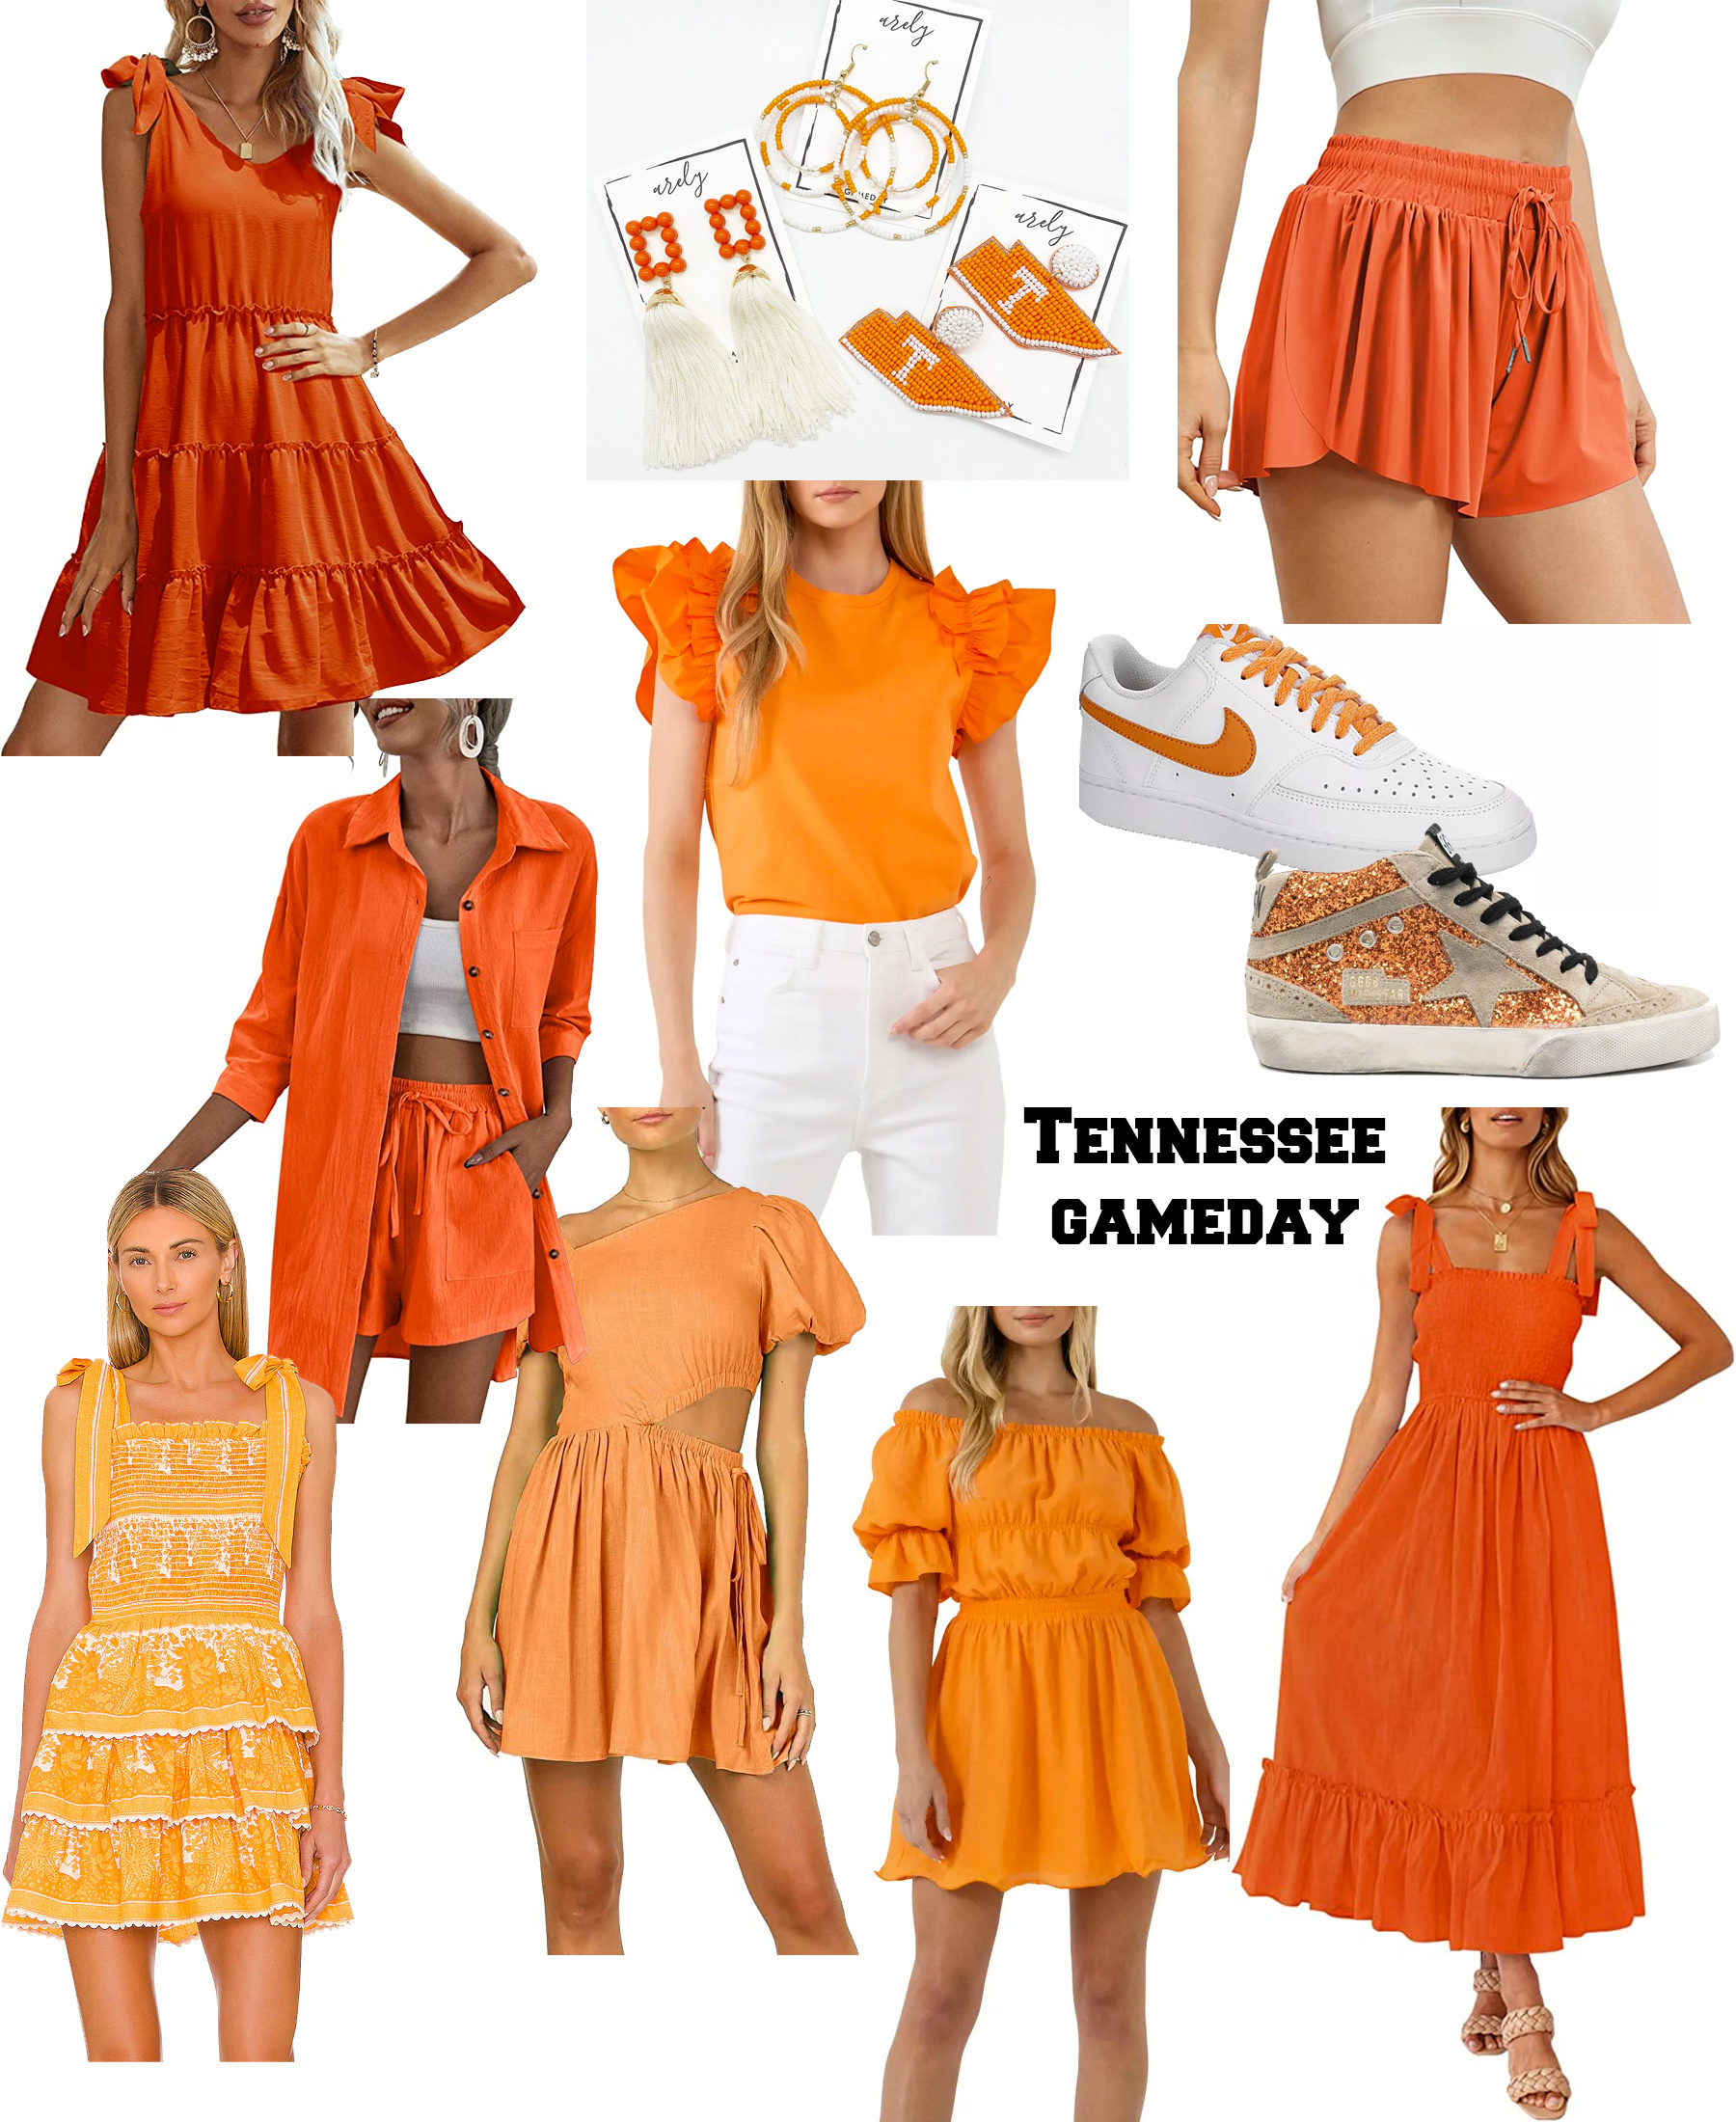 tennessee-gameday-outfits